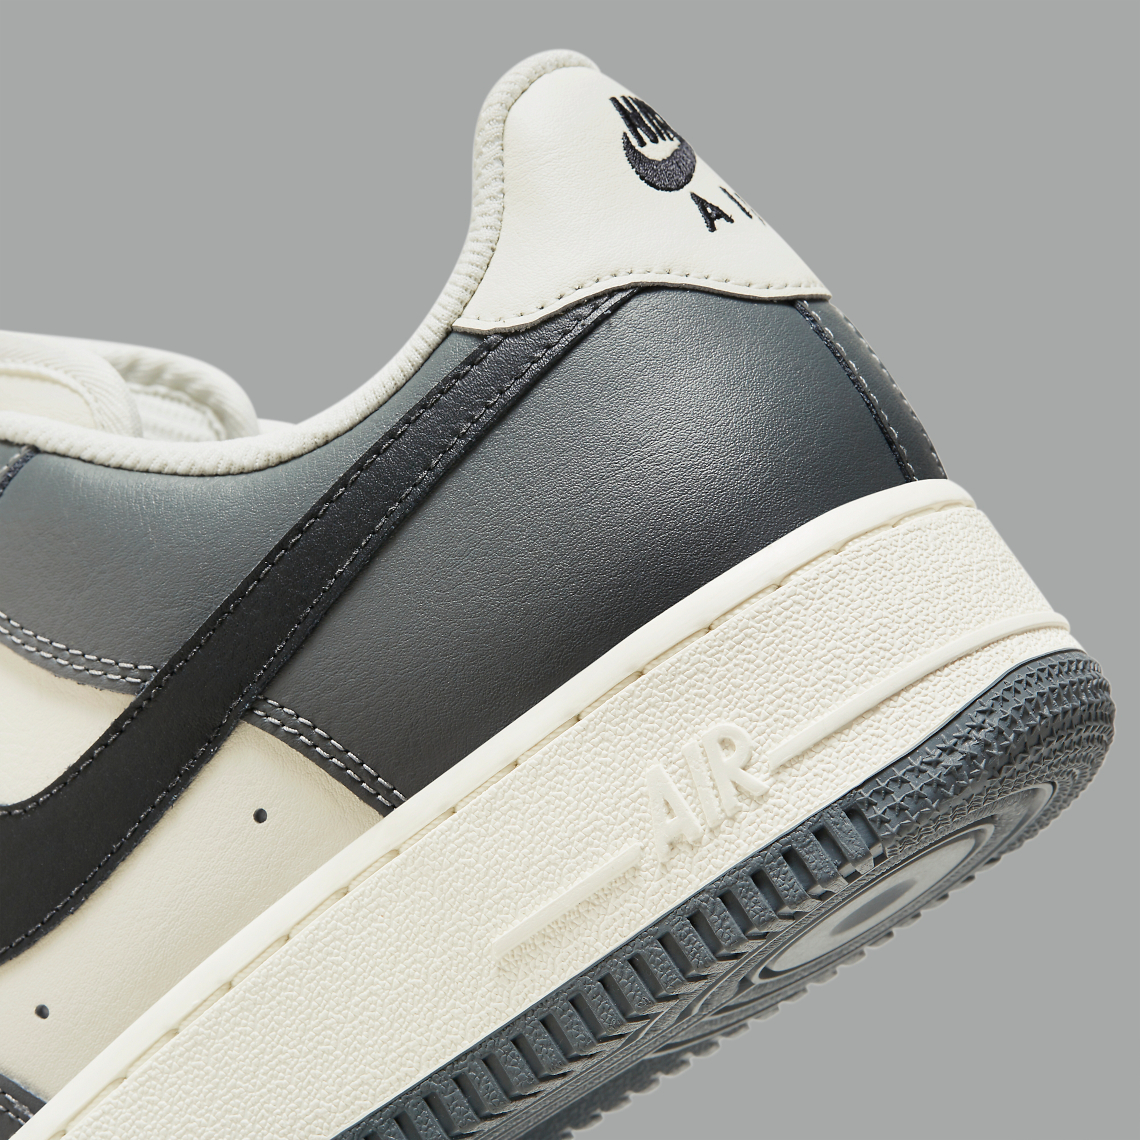 Nike nike air force 1 grey cement board price india Low Fd9063 100 3